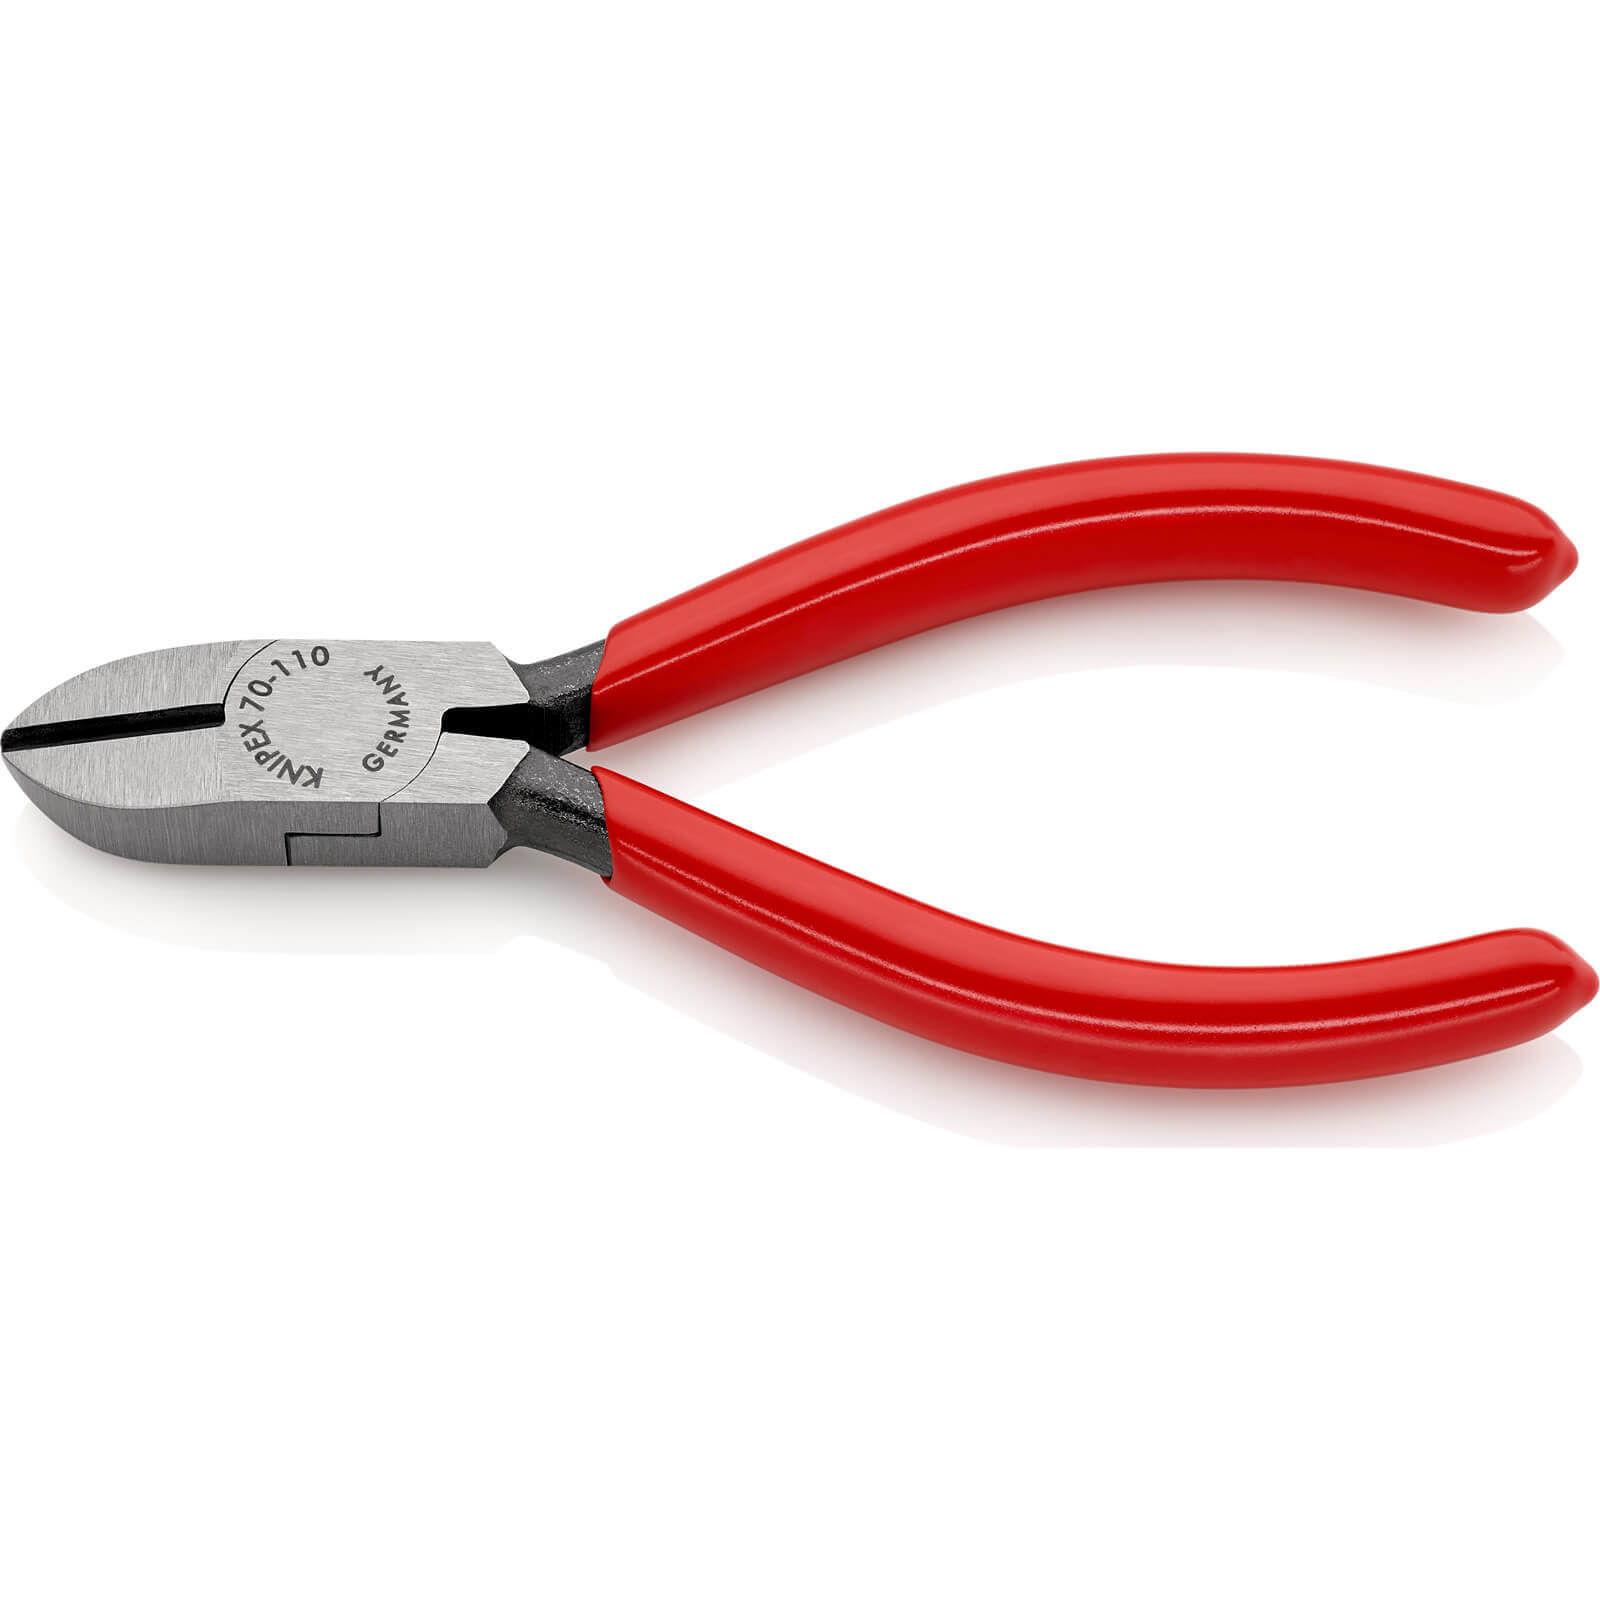 Photo of Knipex 70 01 Diagonal Cutting Pliers 110mm